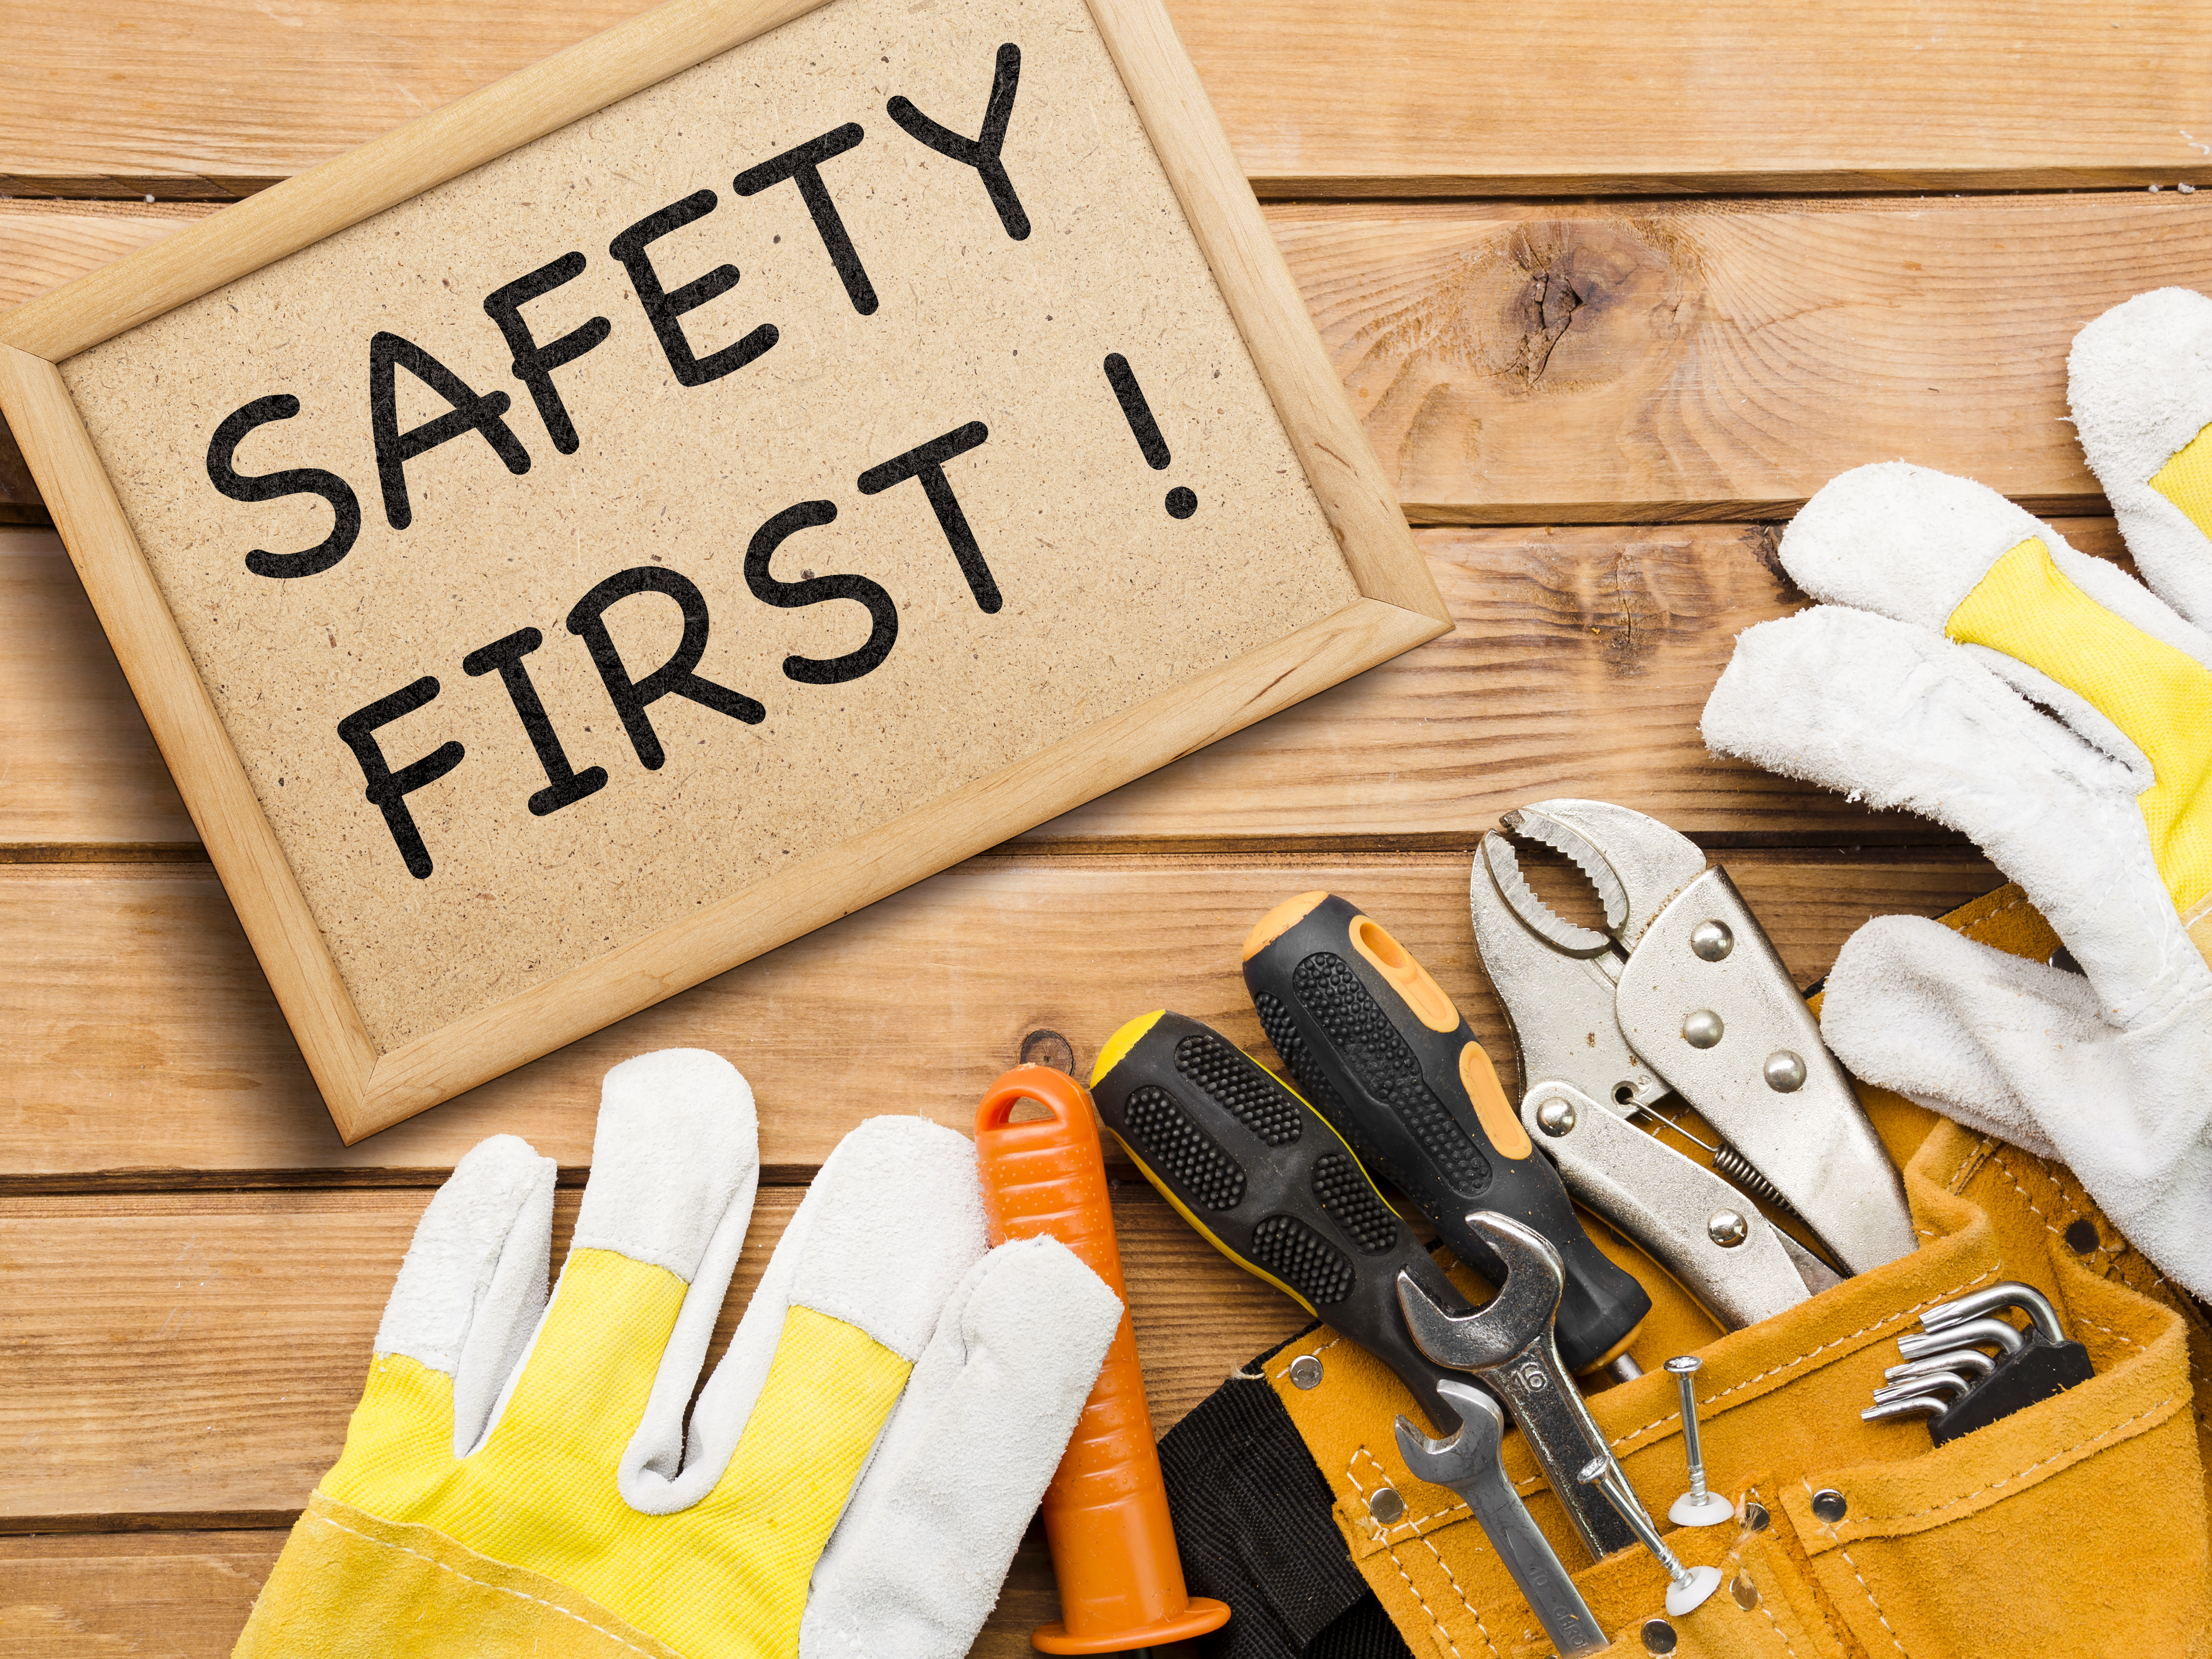 Improving Safety Standards through Automated Systems